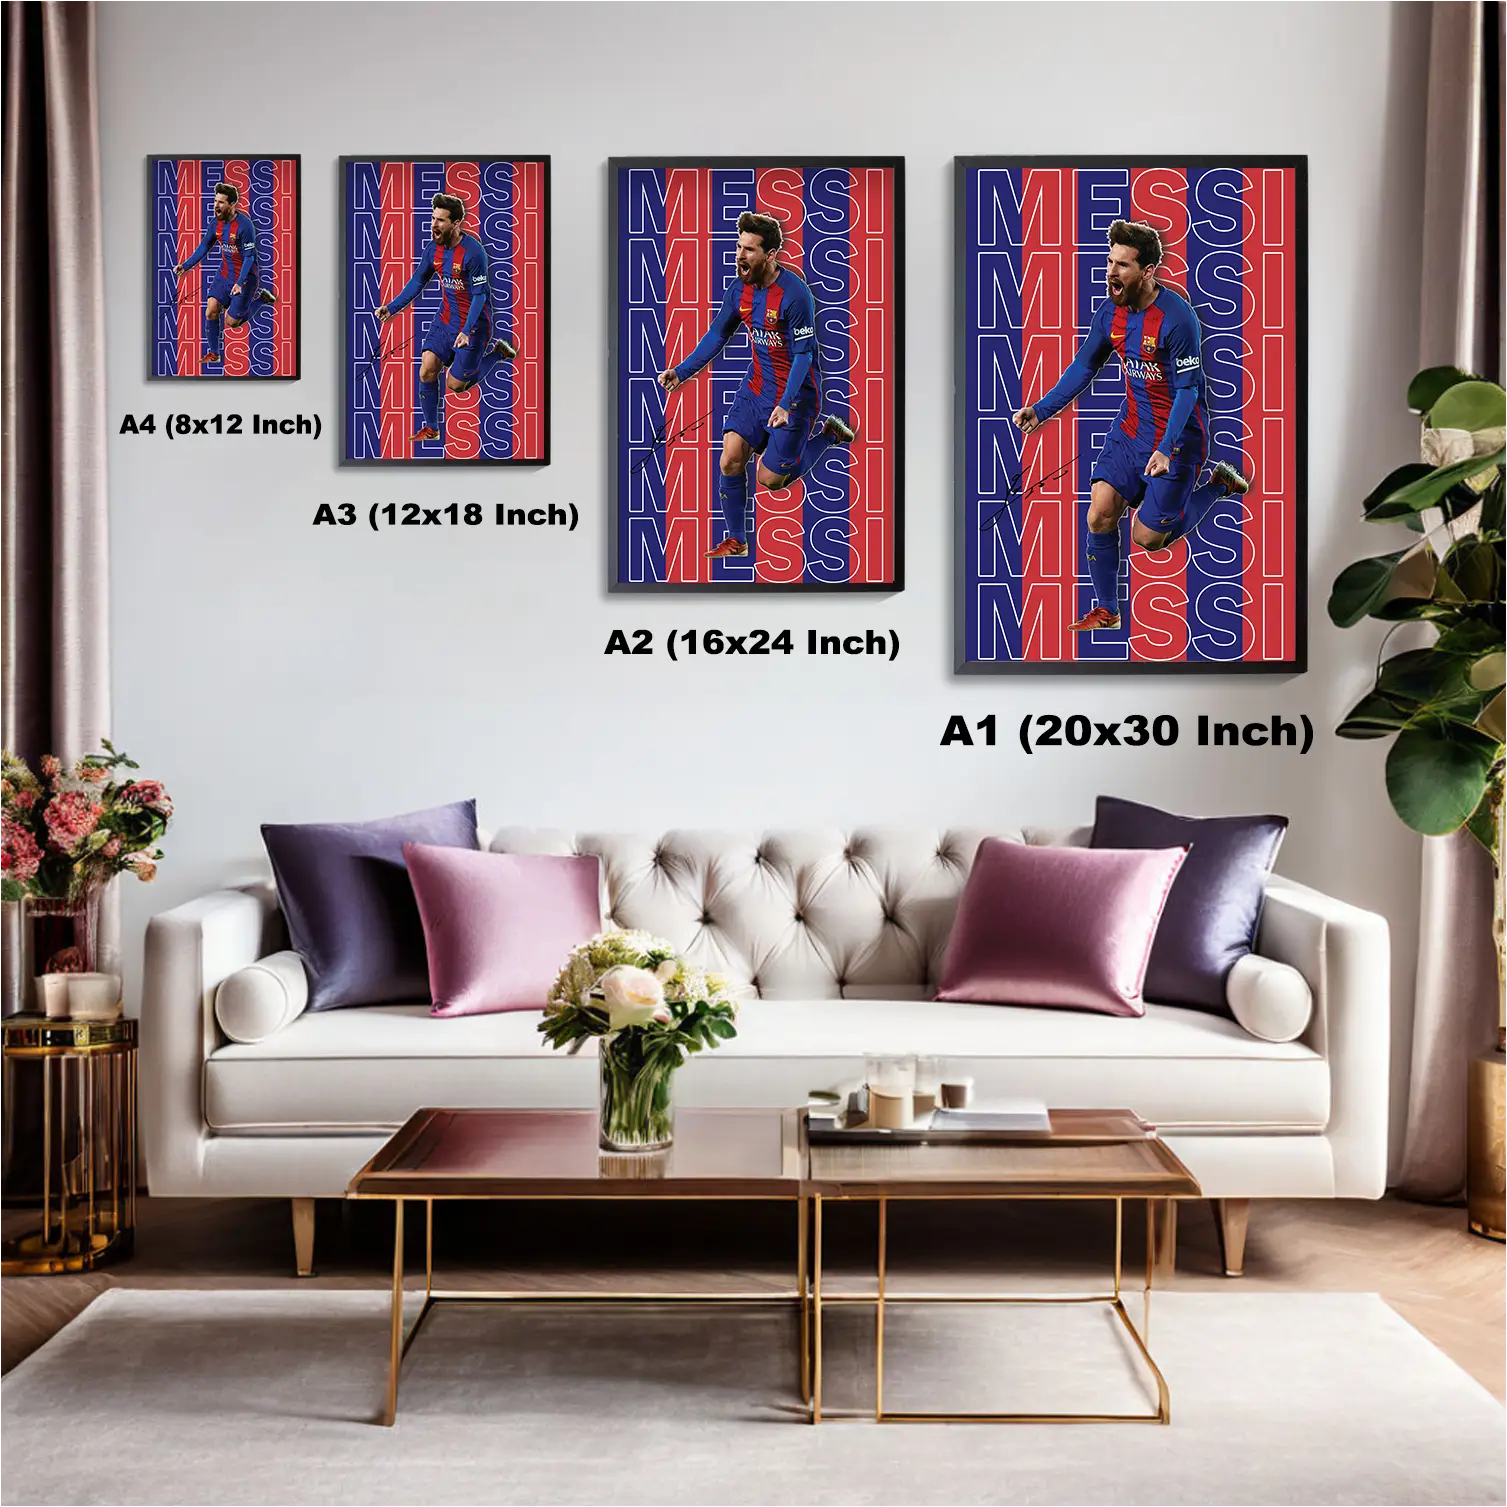 Messi Poster for Home Office and Student Room Wall | Poster | Frame | Canvas